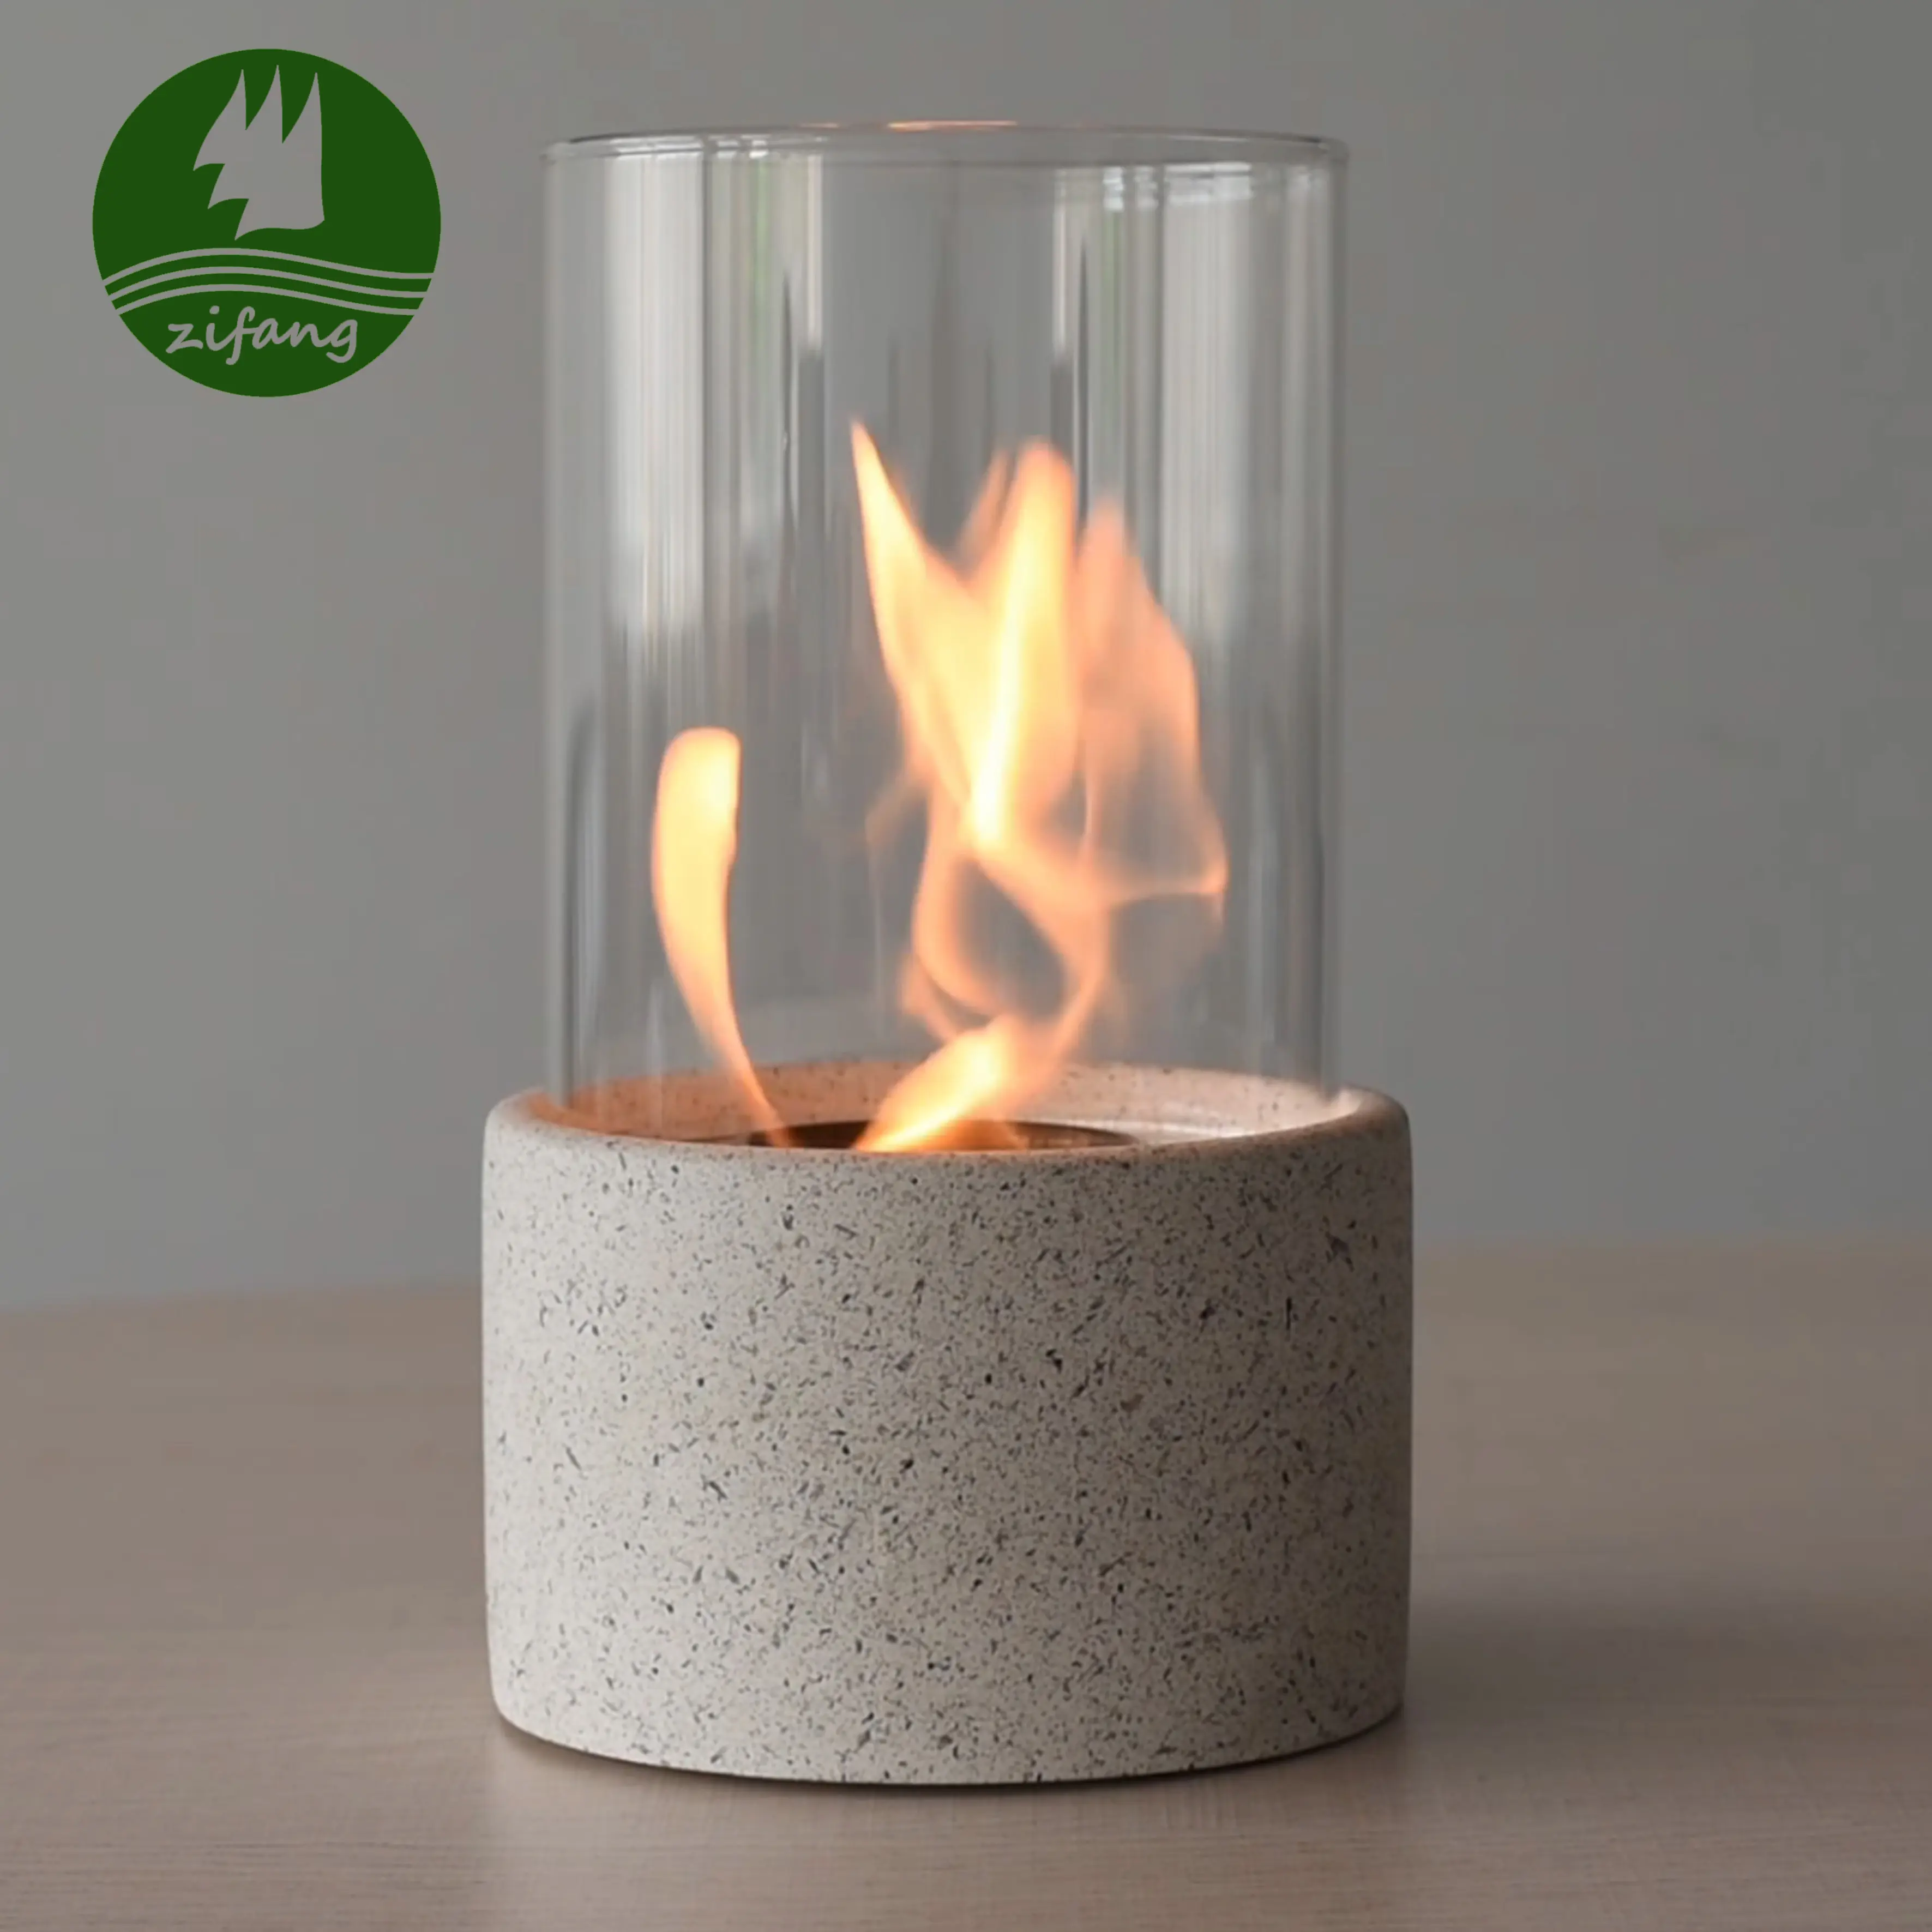 Home decor fireplace, ethanol tabletop fireplace